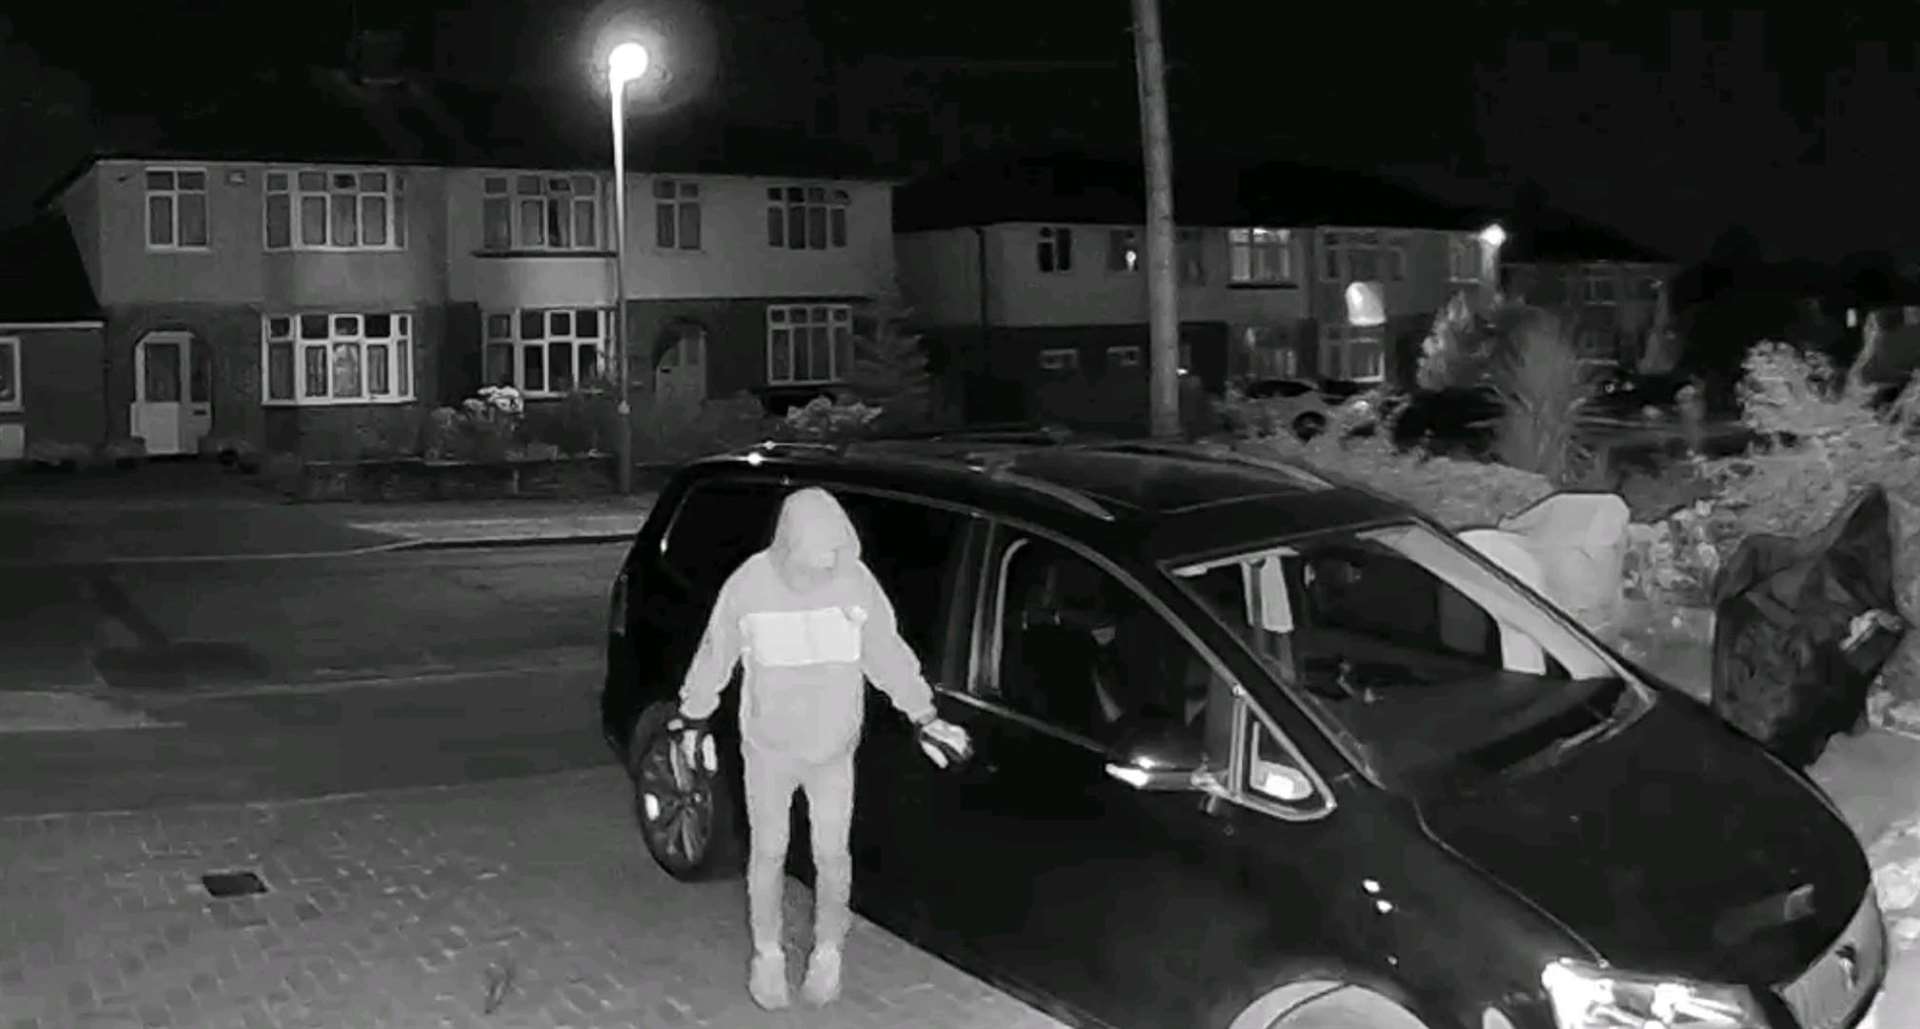 A man was spotted on a doorbell camera getting into a car